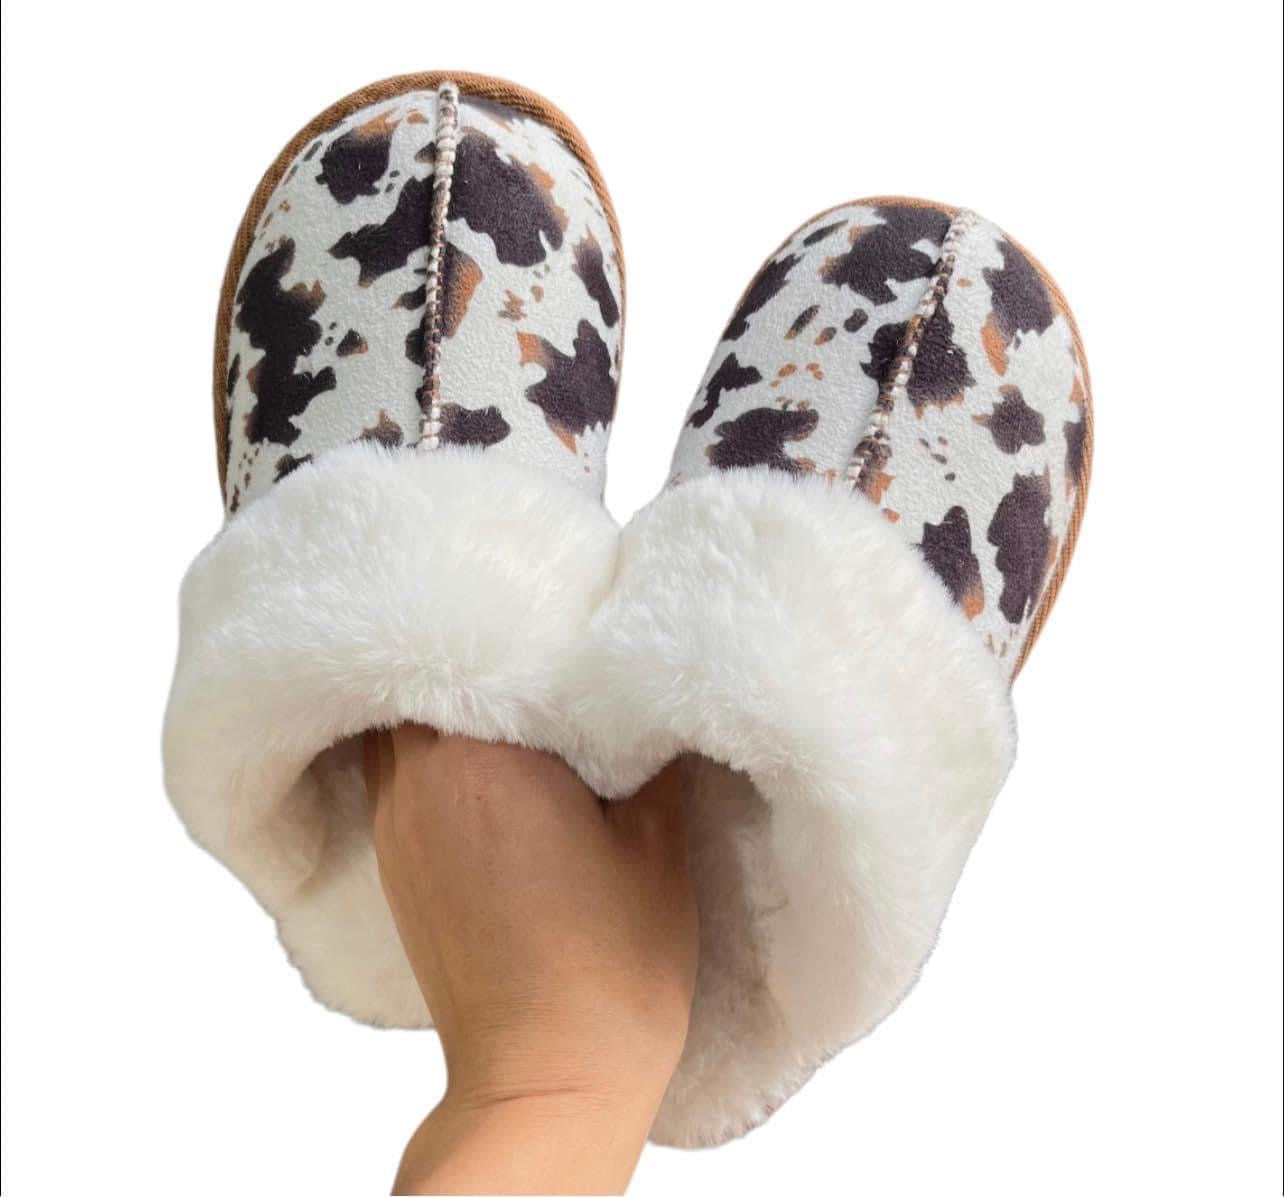 Black cow slippers